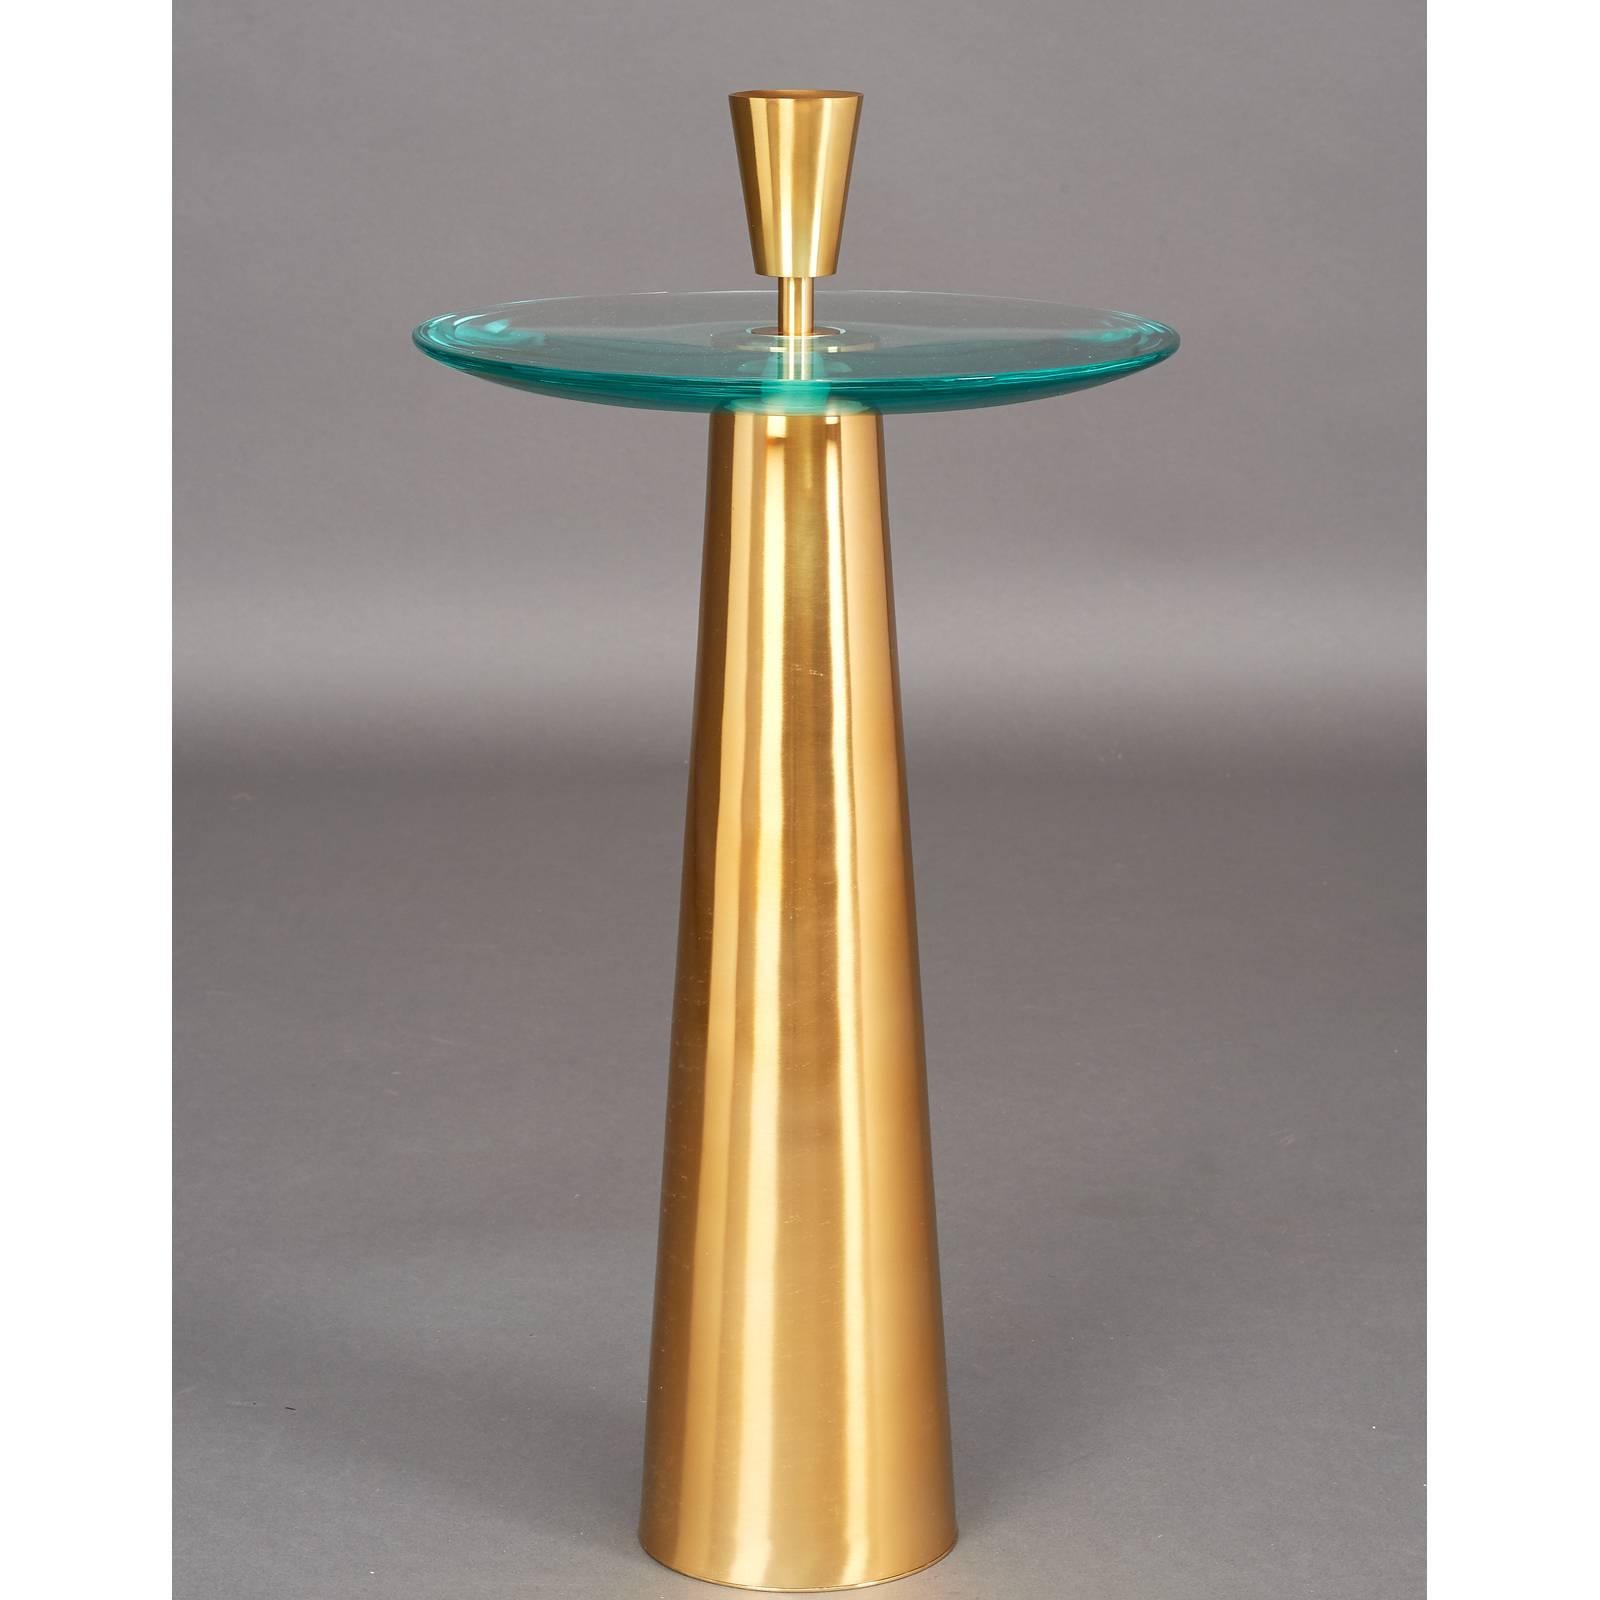 Roberto Rida (b. 1943).
Sculptural side table with massive ground-glass top with convex underside, polished tapered brass base and finial.
Signed. Italy, 2016.
Shown as a pair, priced and sold individually
Limited edition, exclusive to L'Art de